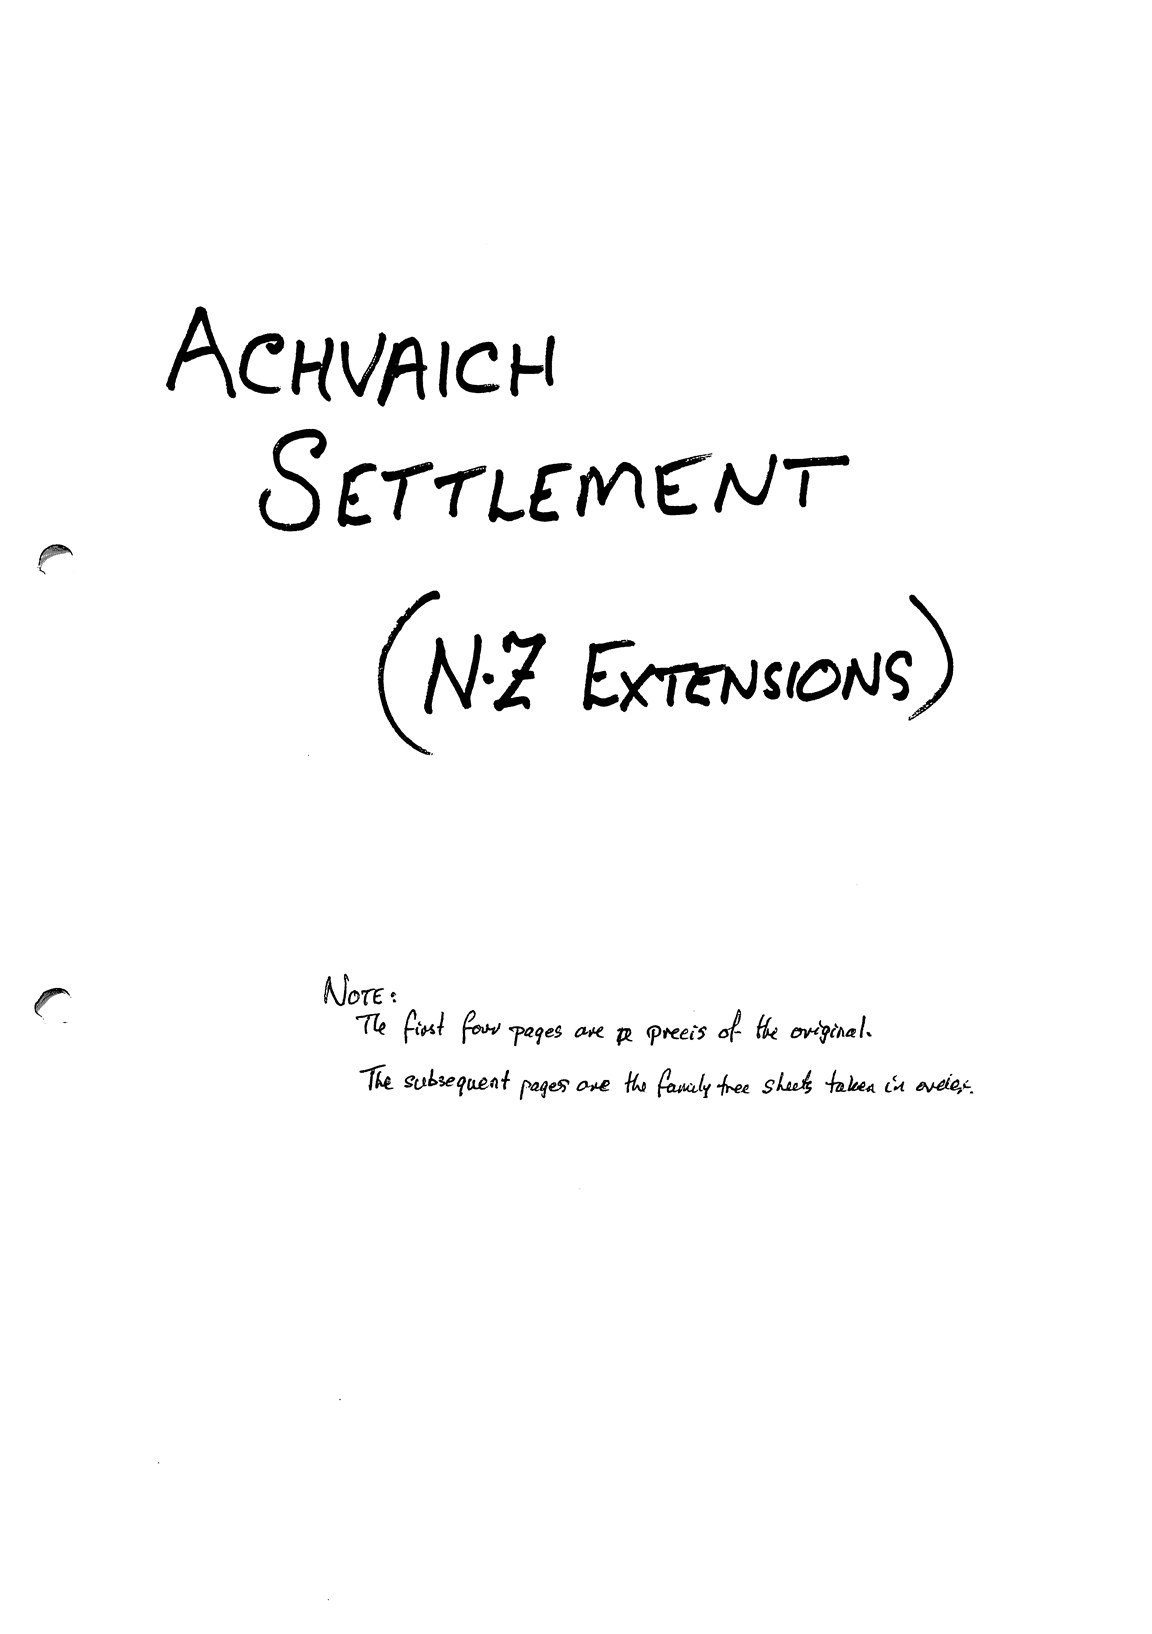 Achvaich Settlement (N.Z. Extensions) with family tree